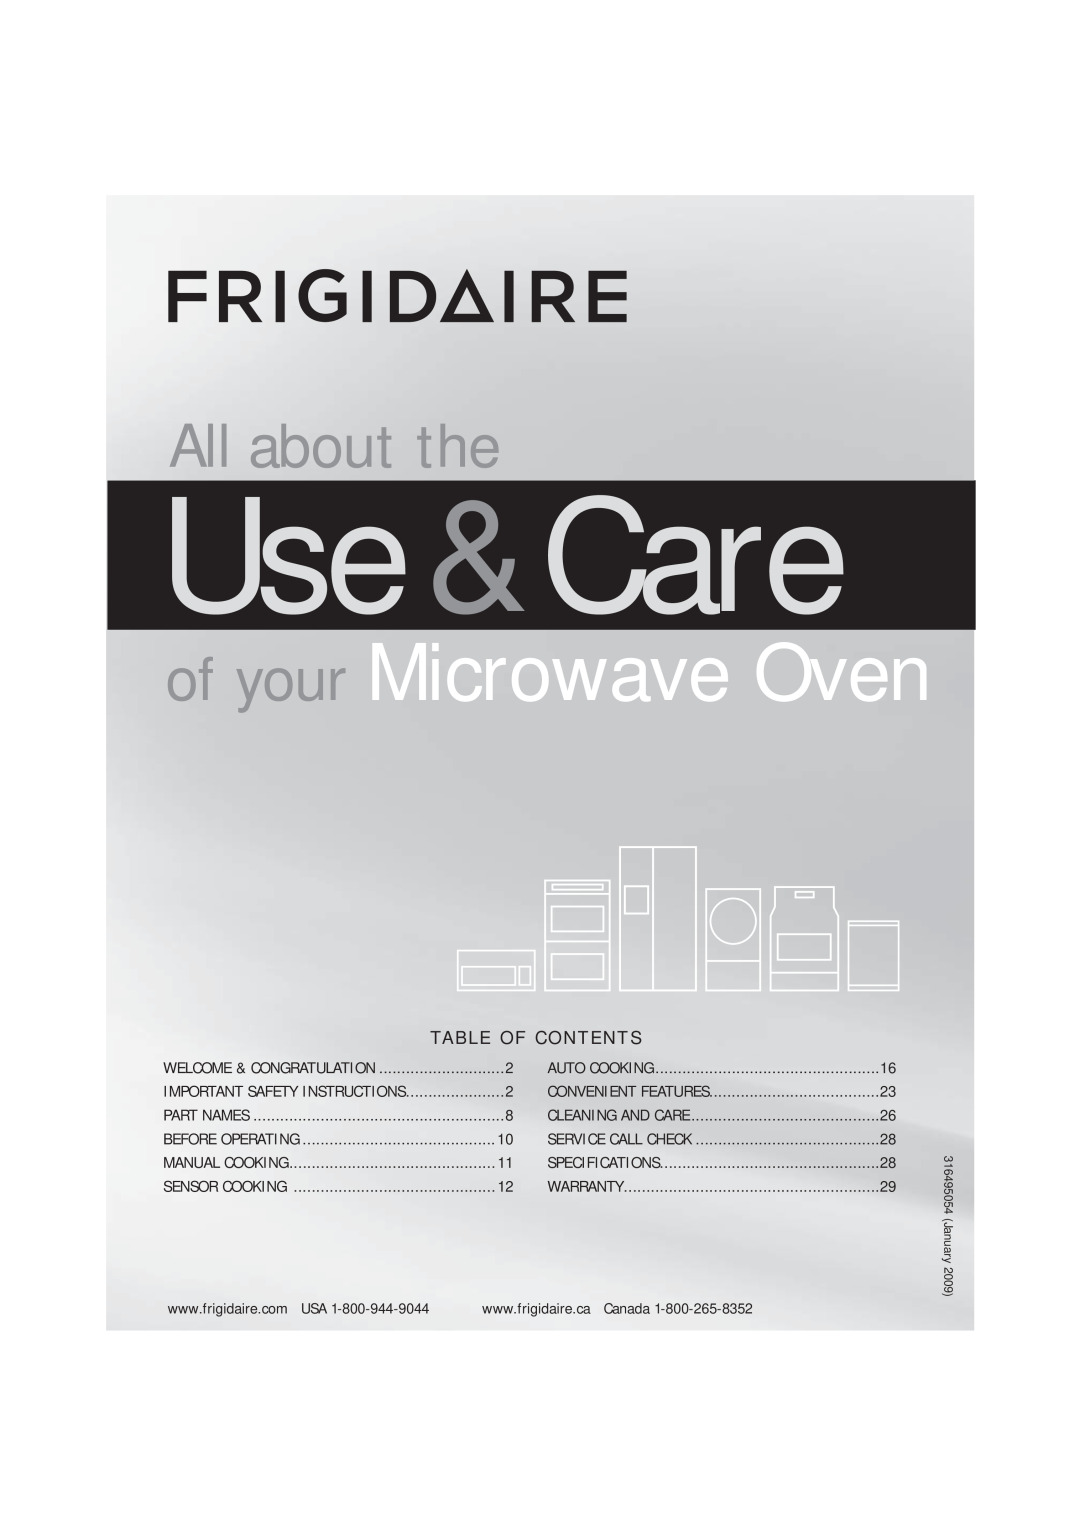 Frigidaire 316495054 manual Use &Care, of your Microwave Oven, All about the, Ta B L E O F C O N T E N T S 